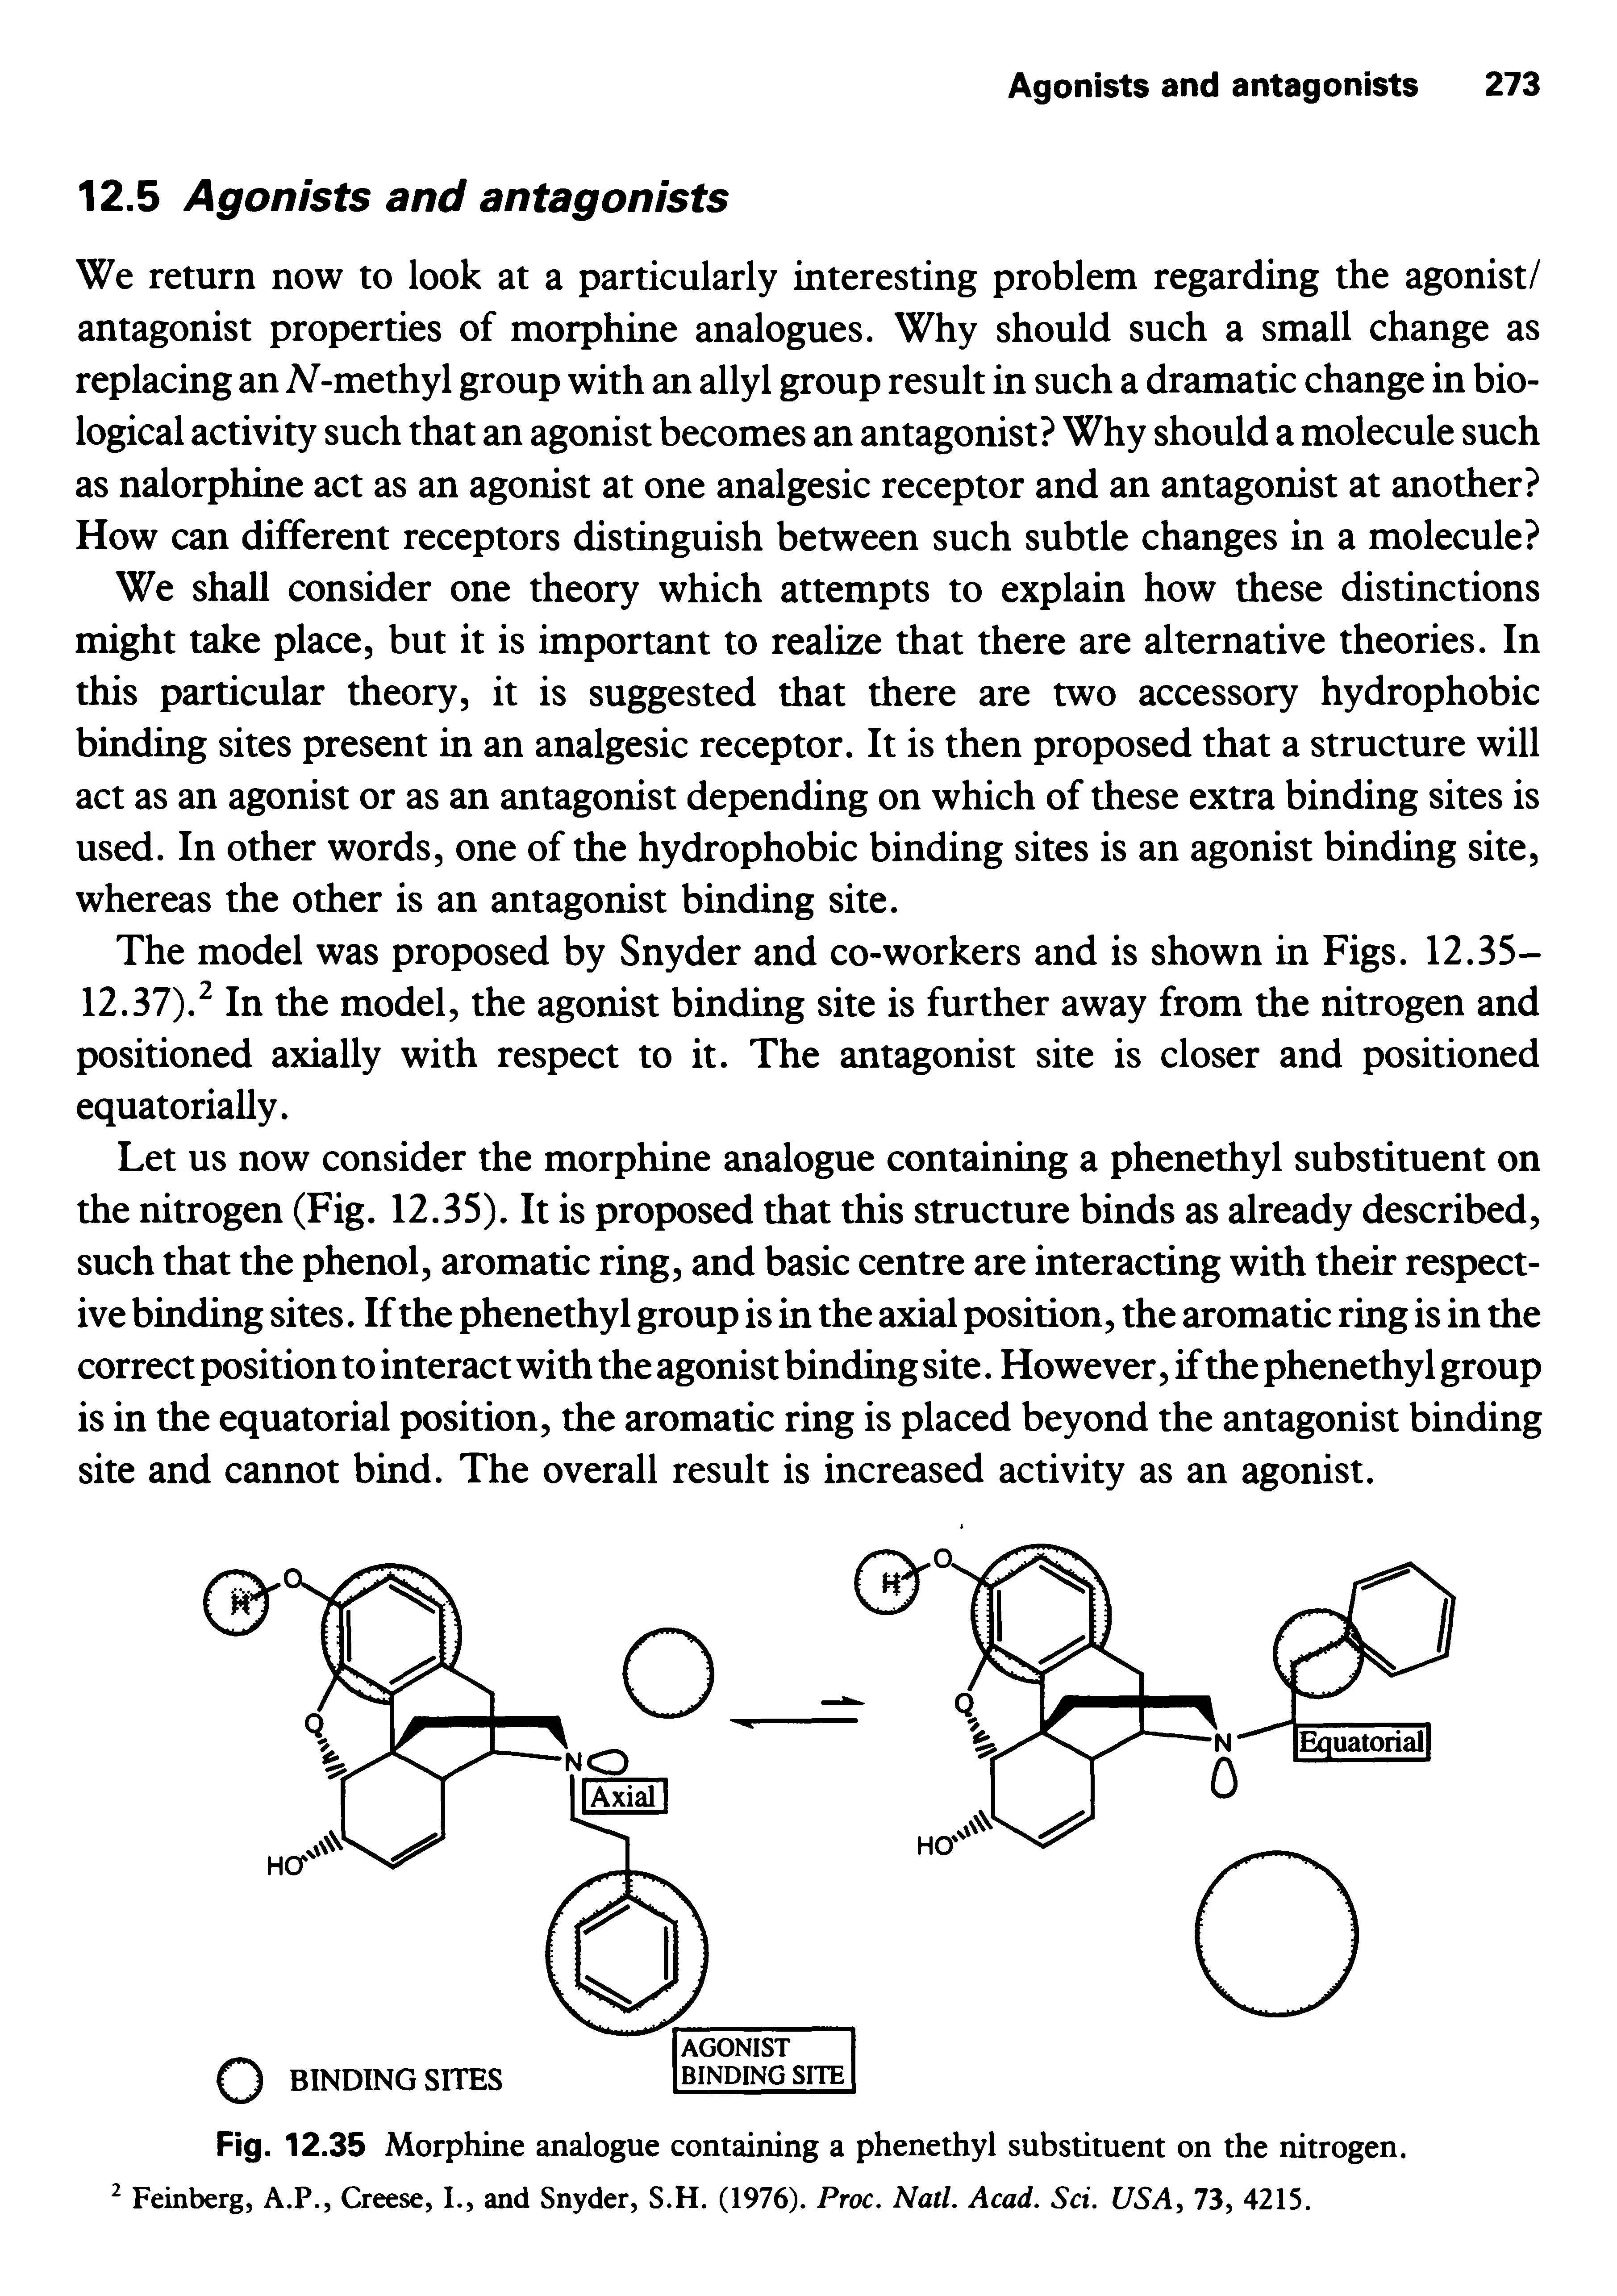 Fig. 12.35 Morphine analogue containing a phenethyl substituent on the nitrogen. 2 Feinberg, A.P., Creese, I., and Snyder, S.H. (1976). Proc. Natl. Acad. Sci. USA, 73, 4215.